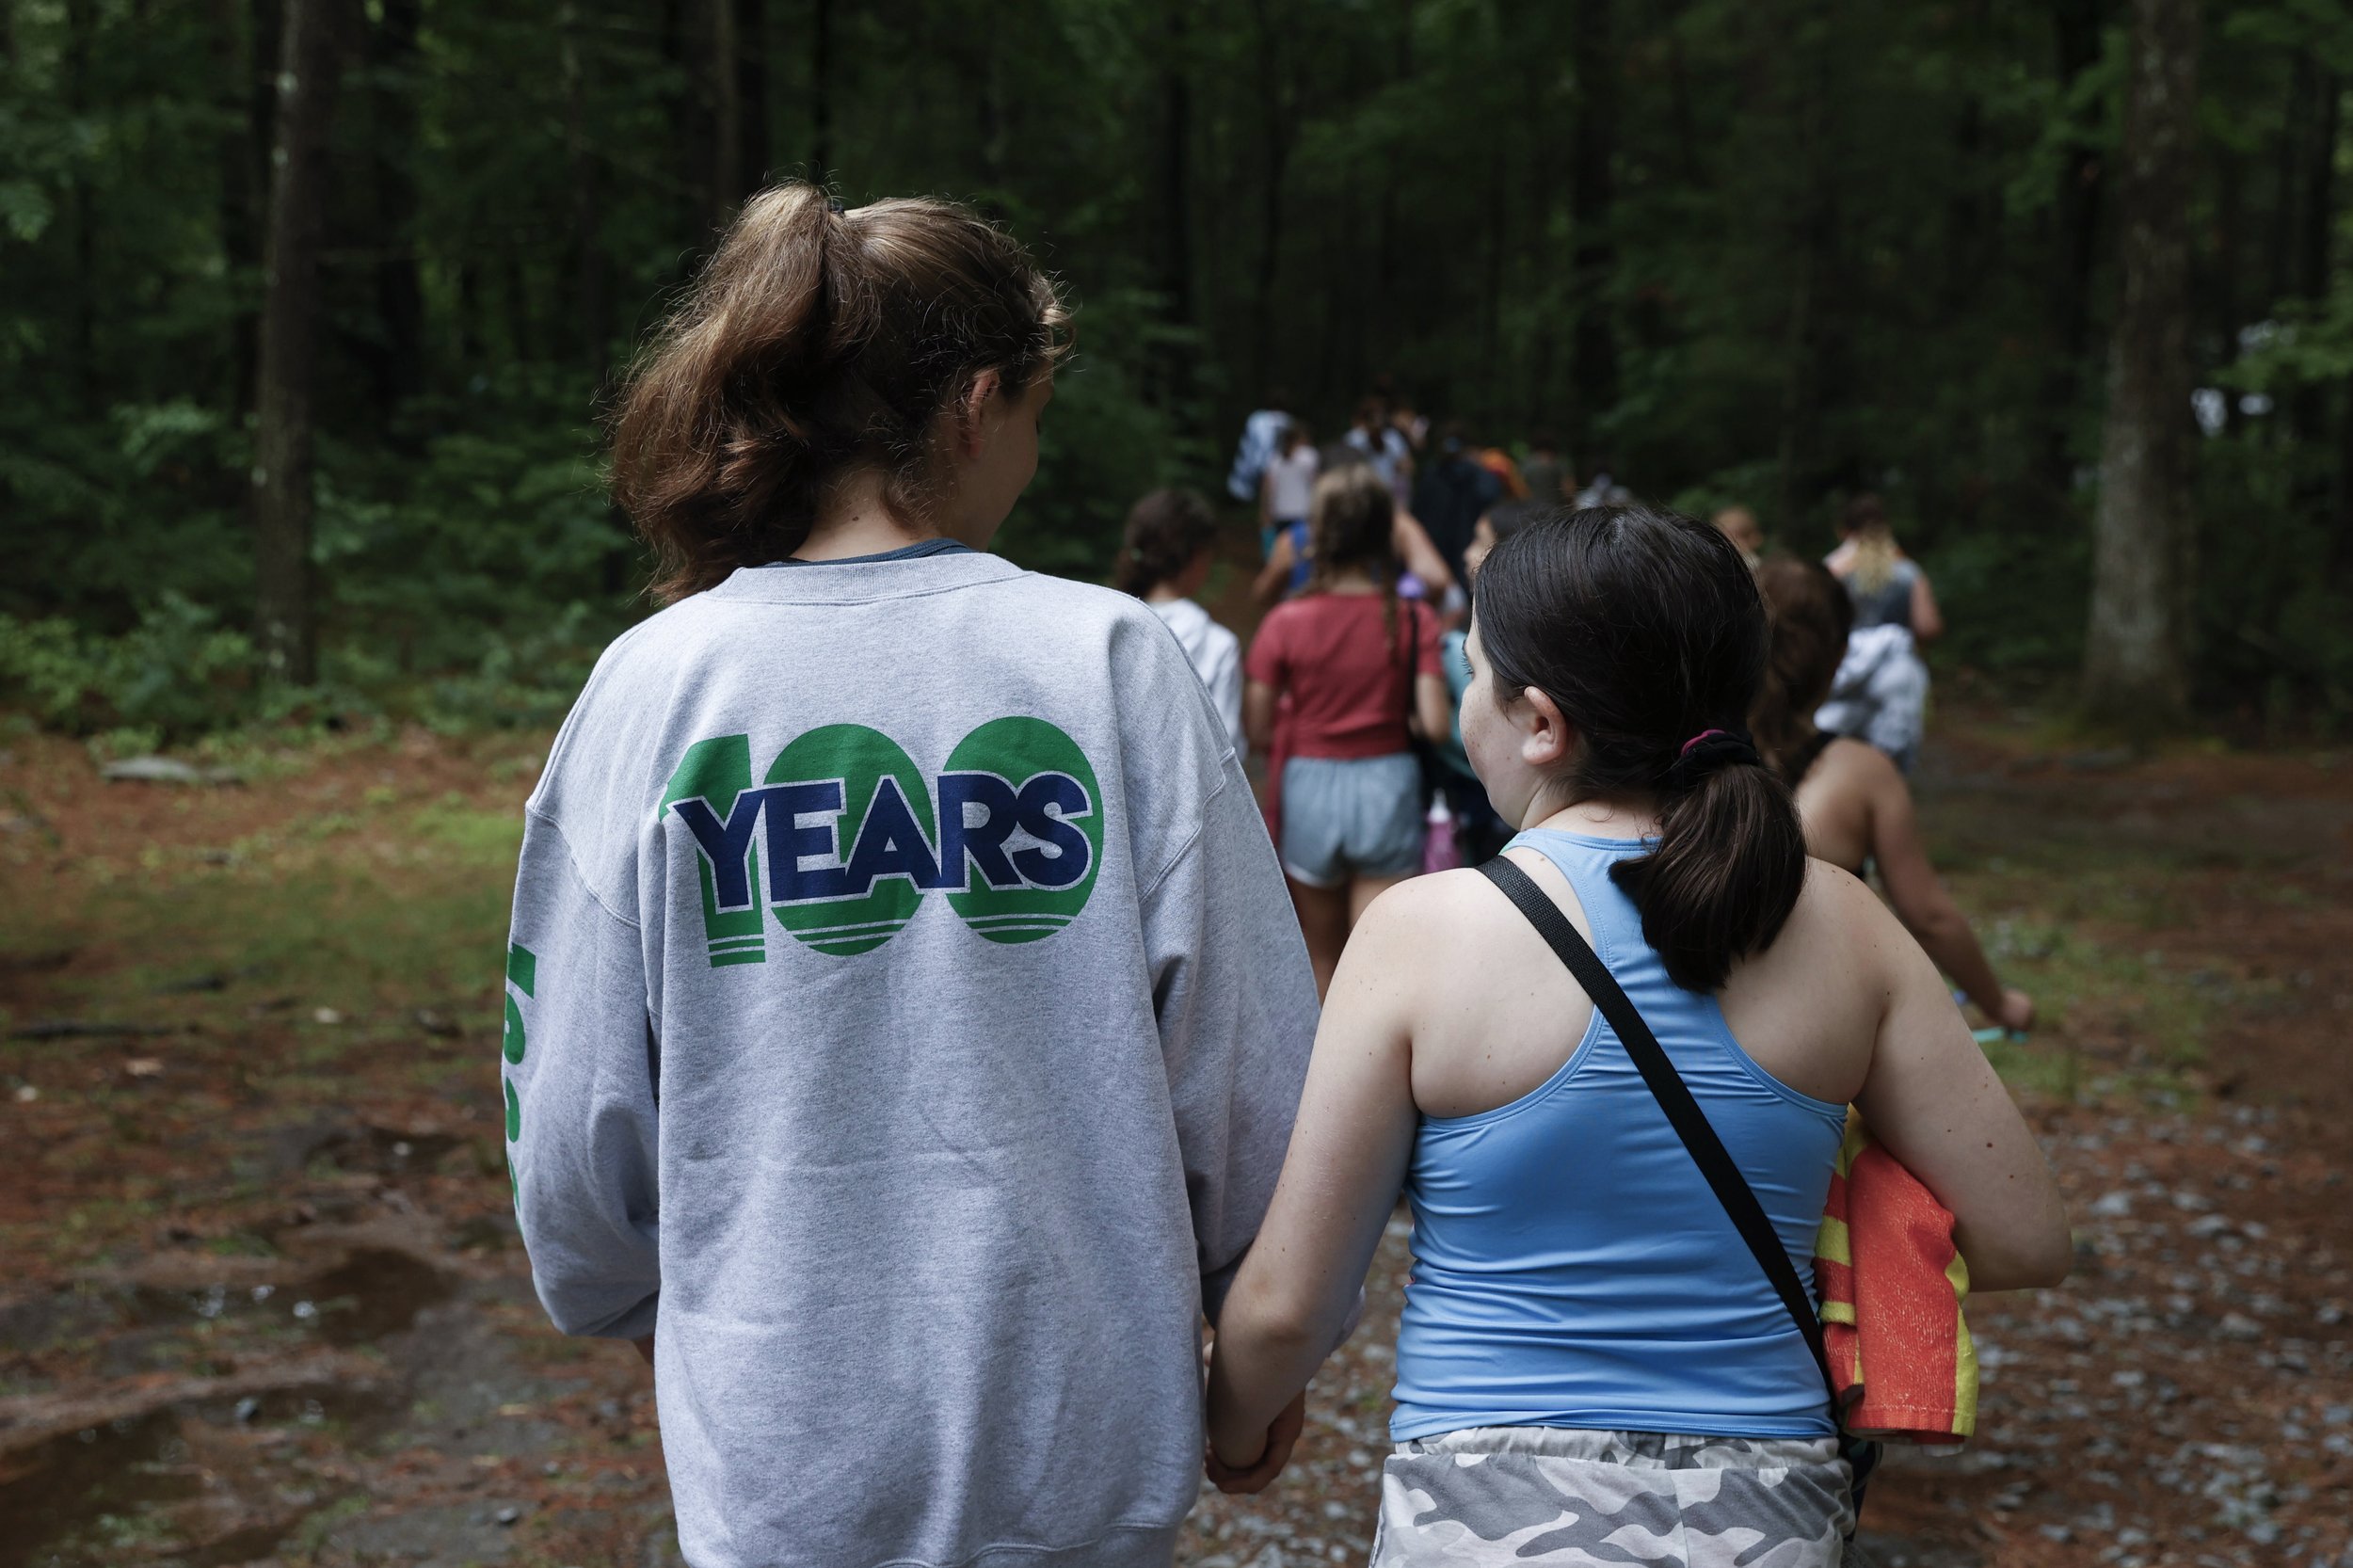  Eli Gross (left), the head counselor of Bunk 37 (and a former Nah-Jee-Wah camper), walks arm in arm with Amelia Goldin on the bunk’s way to canteen on July 8, 2021. Eli’s shirt has a graphic to represent that this year is the “100th summer” of Nah-J